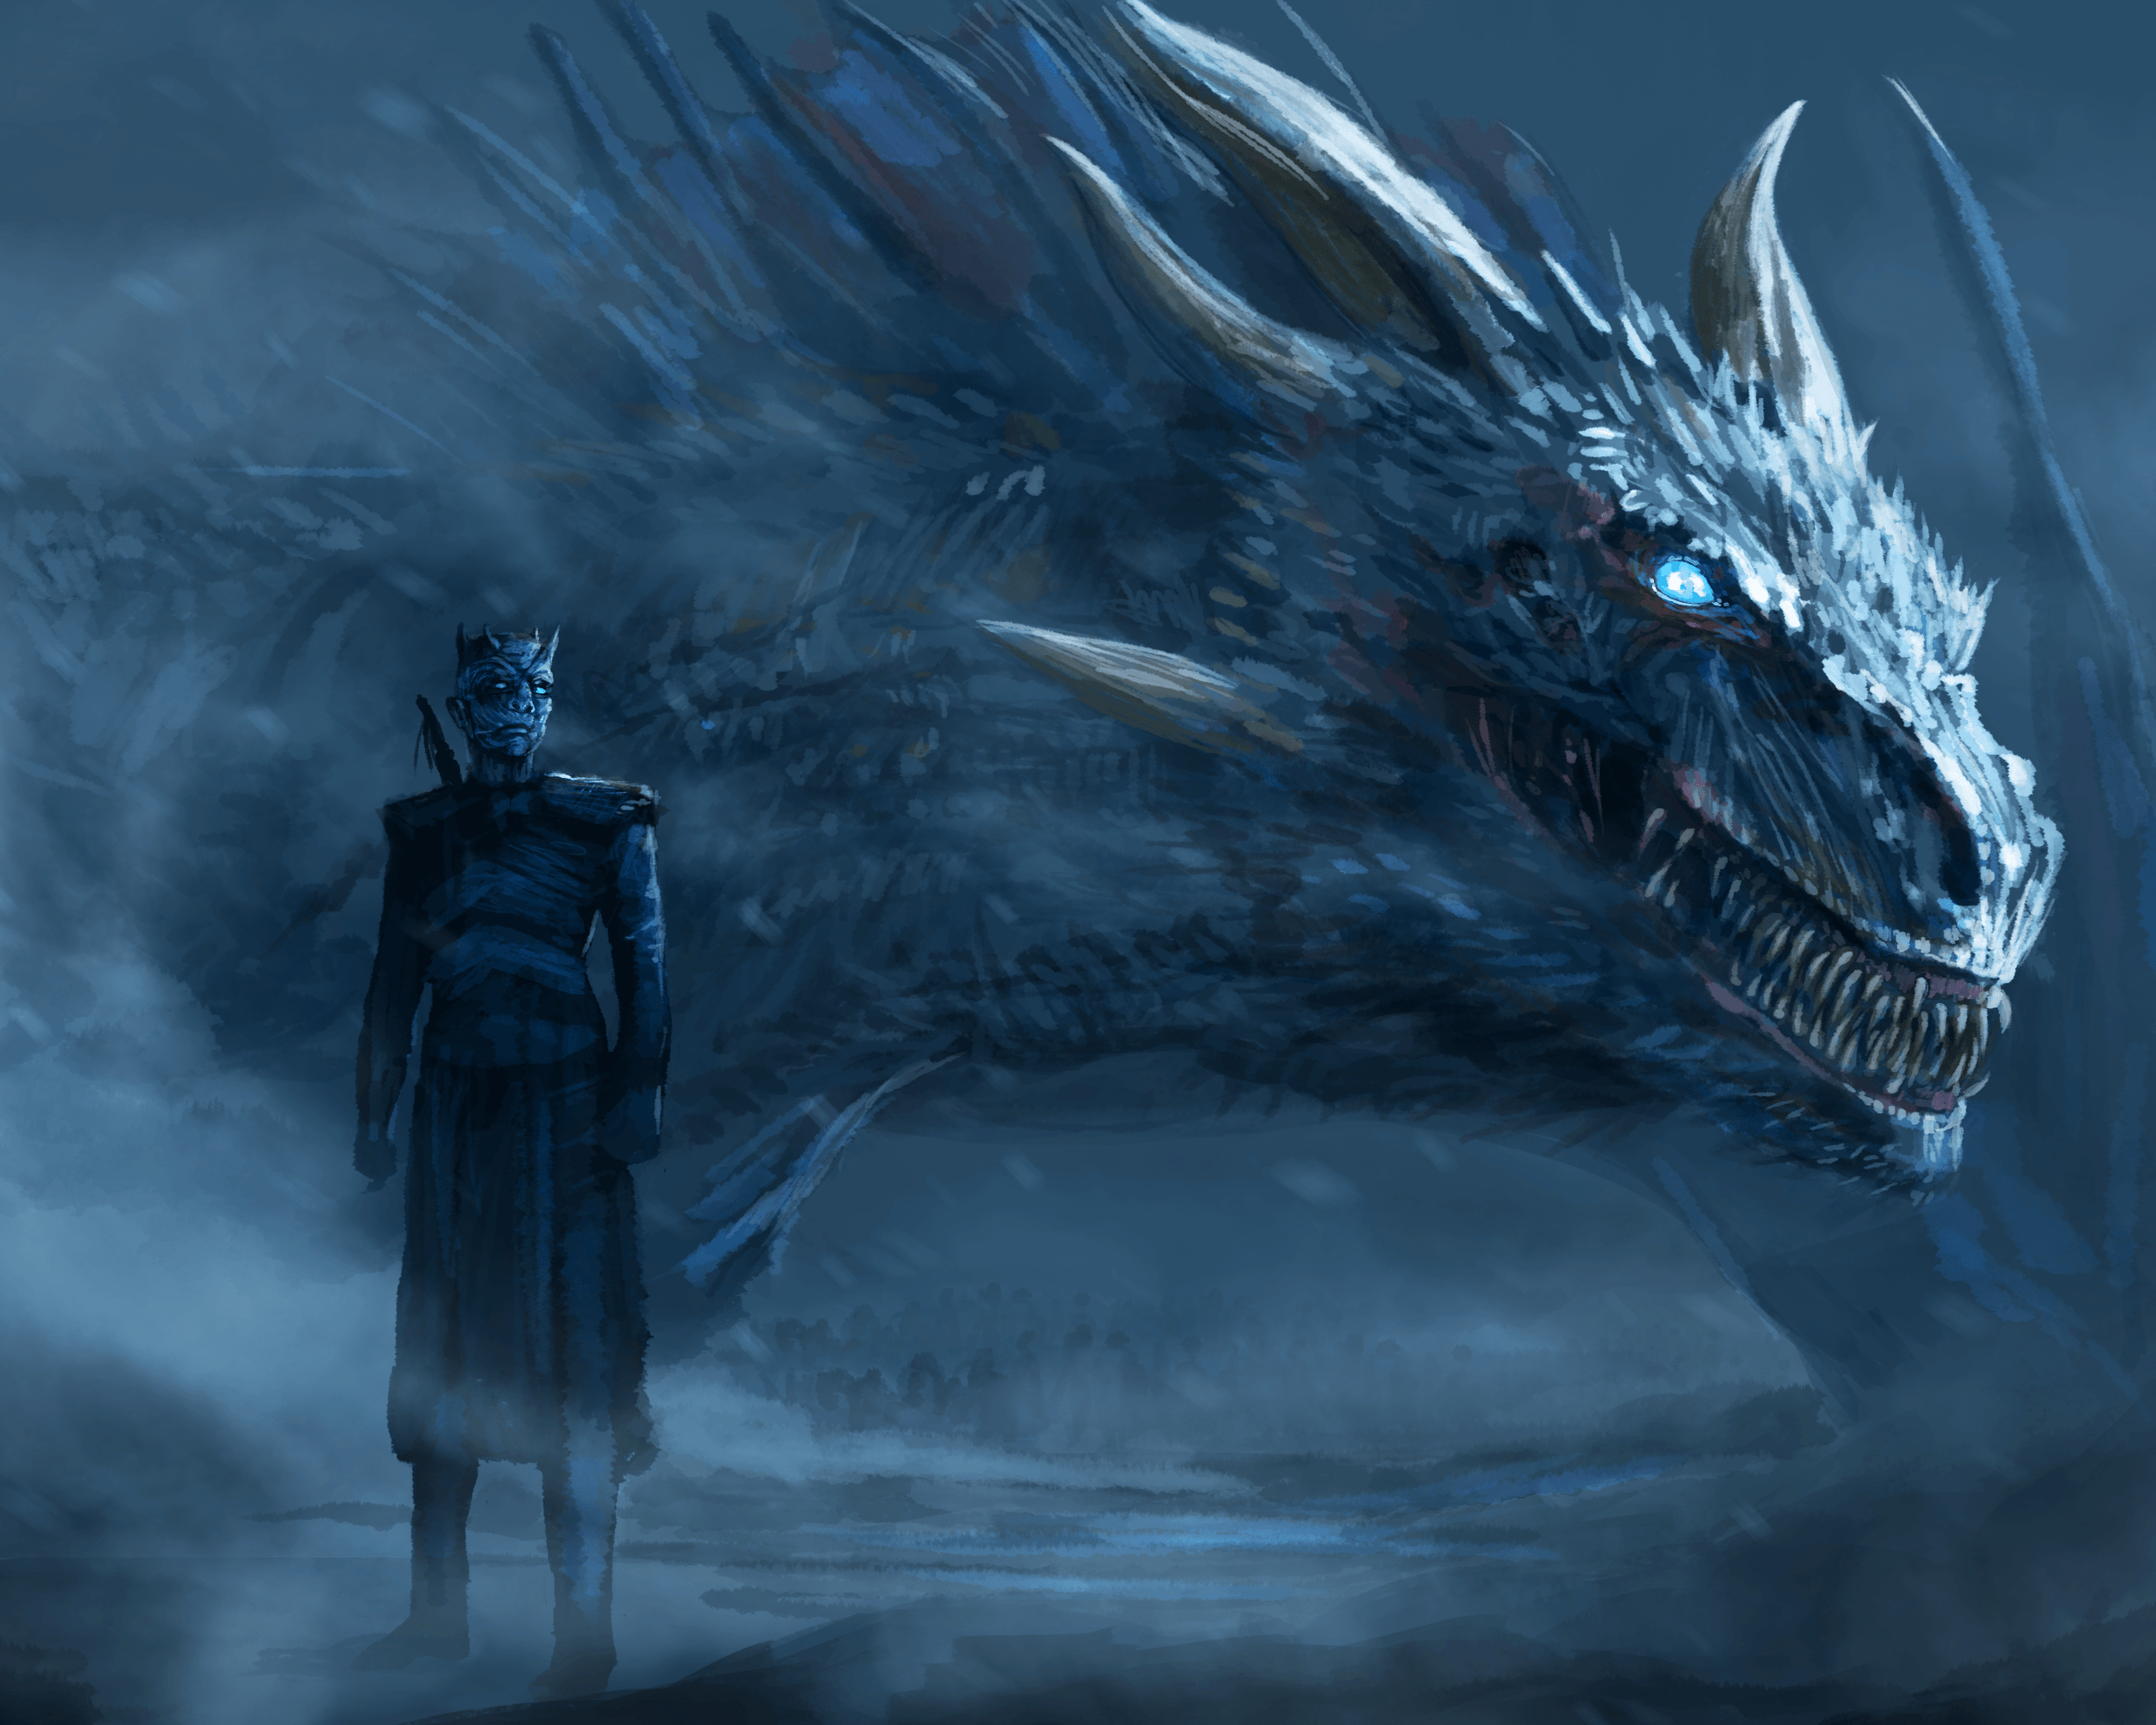 Ice Dragon Game Of Thrones 7 Wallpapers